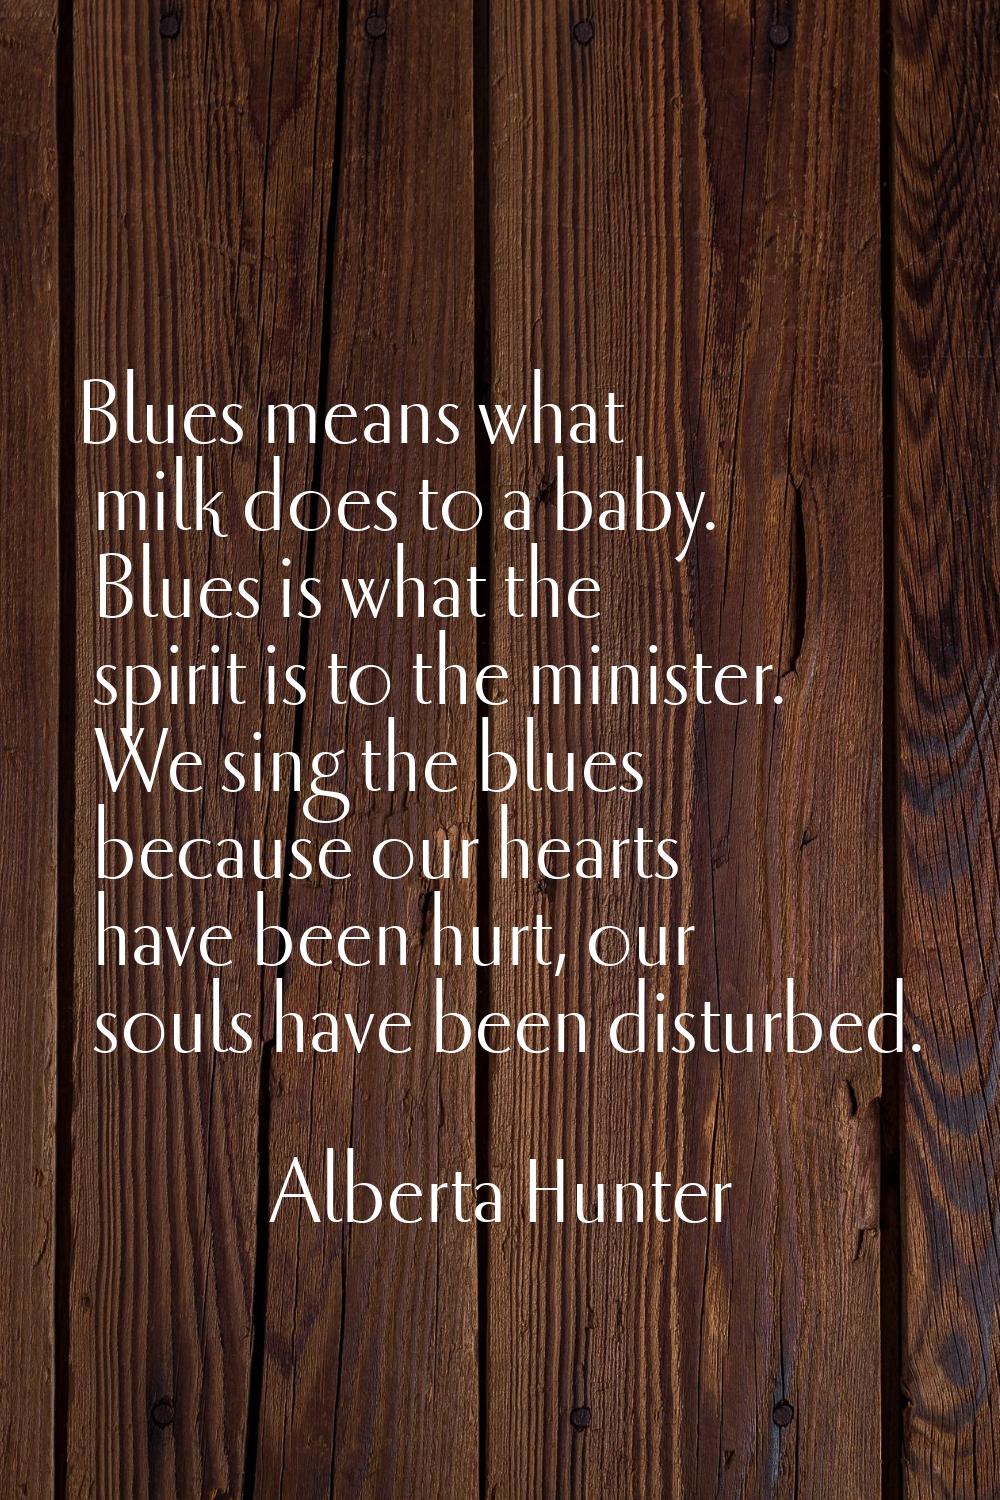 Blues means what milk does to a baby. Blues is what the spirit is to the minister. We sing the blue